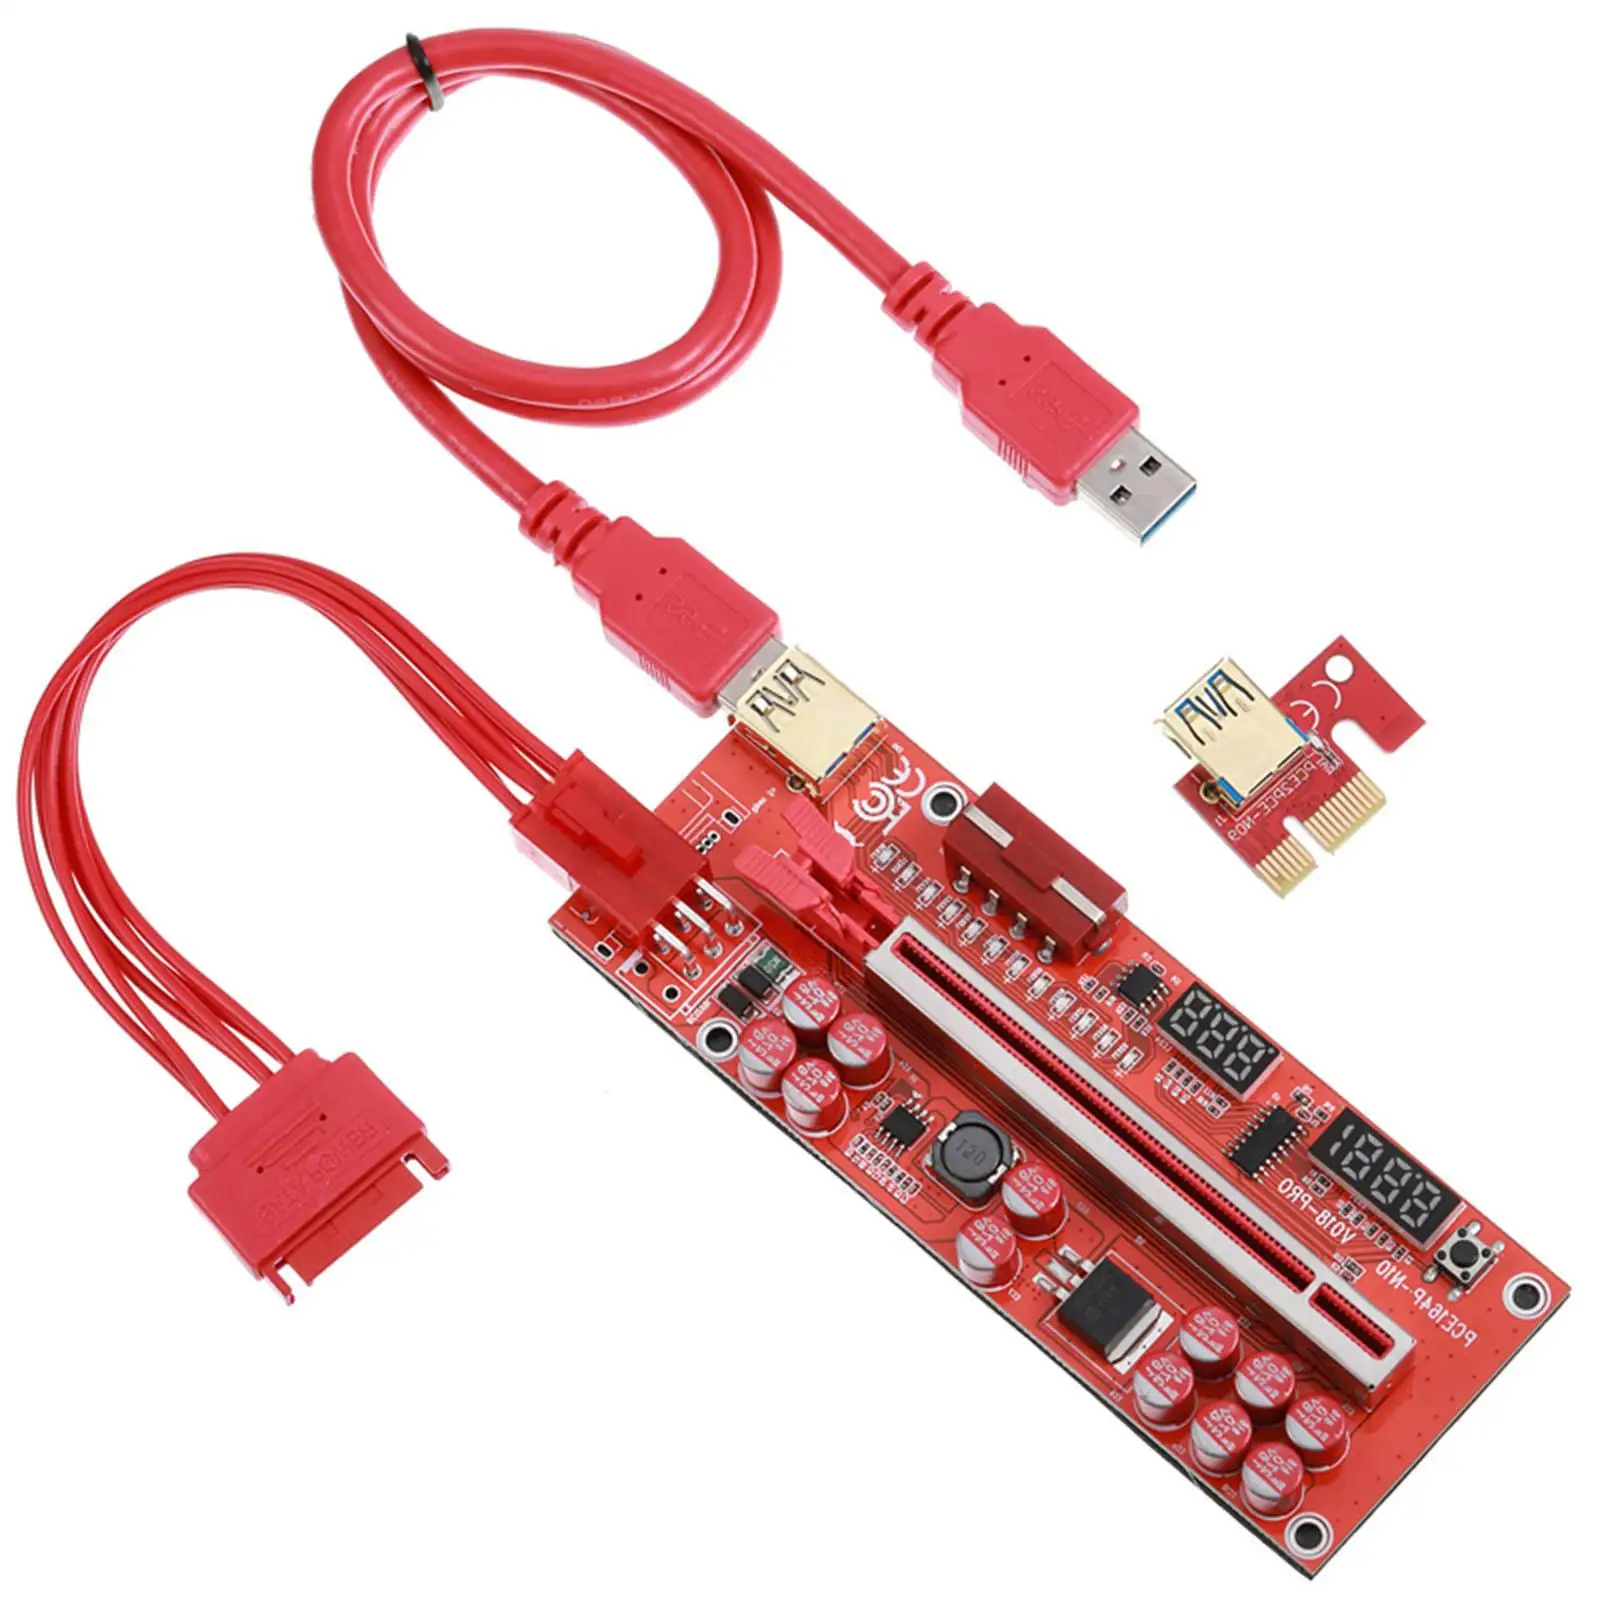 Pci-E Riser Card 6Pin SATA Power Cable 12 Solid Capacitors 60cm USB Extension Cable PCIe 1x to 16x Extender for Video Card